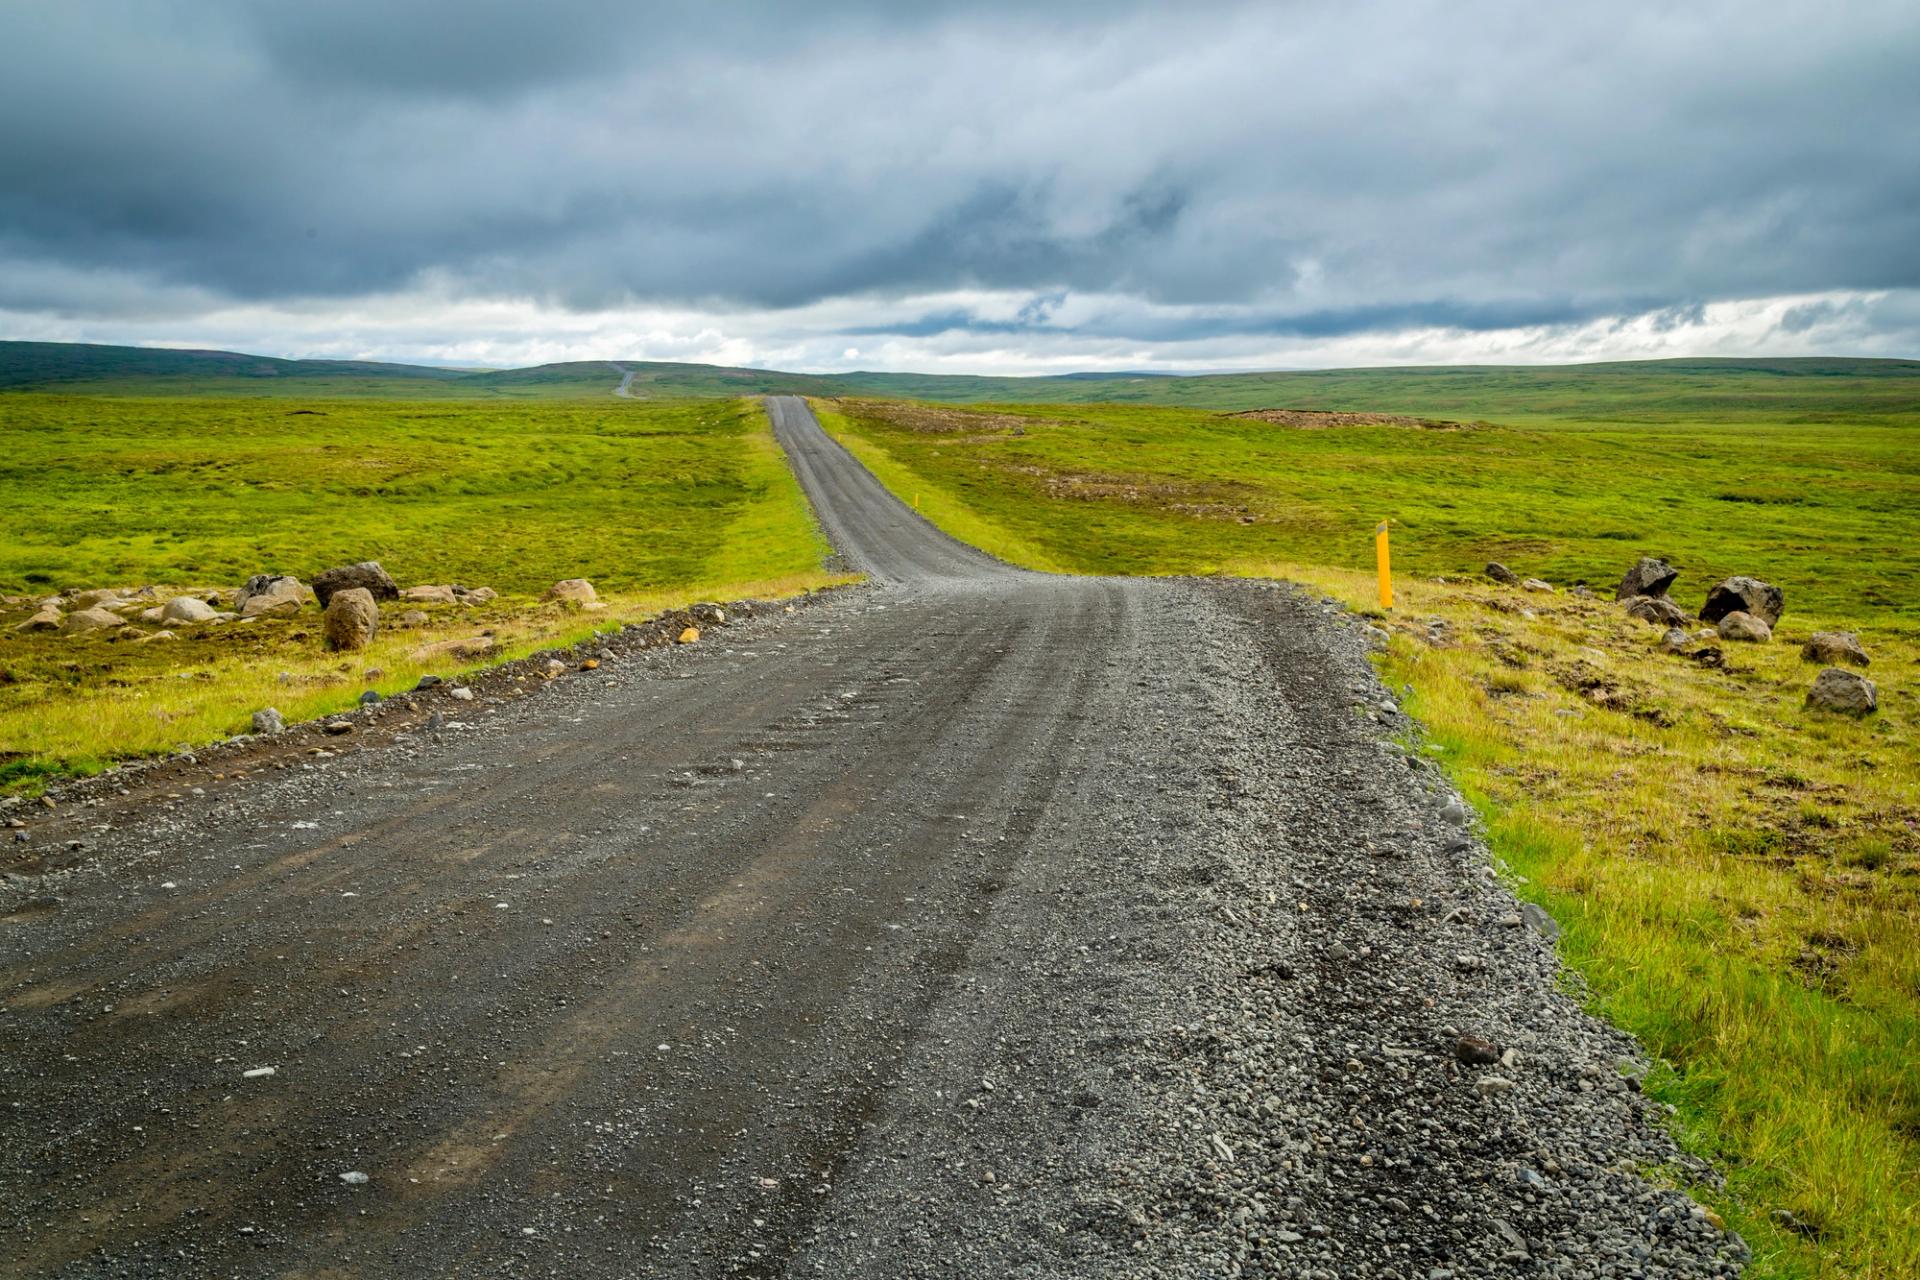 Gravel road in Iceland demonstrating potential challenging driving conditions